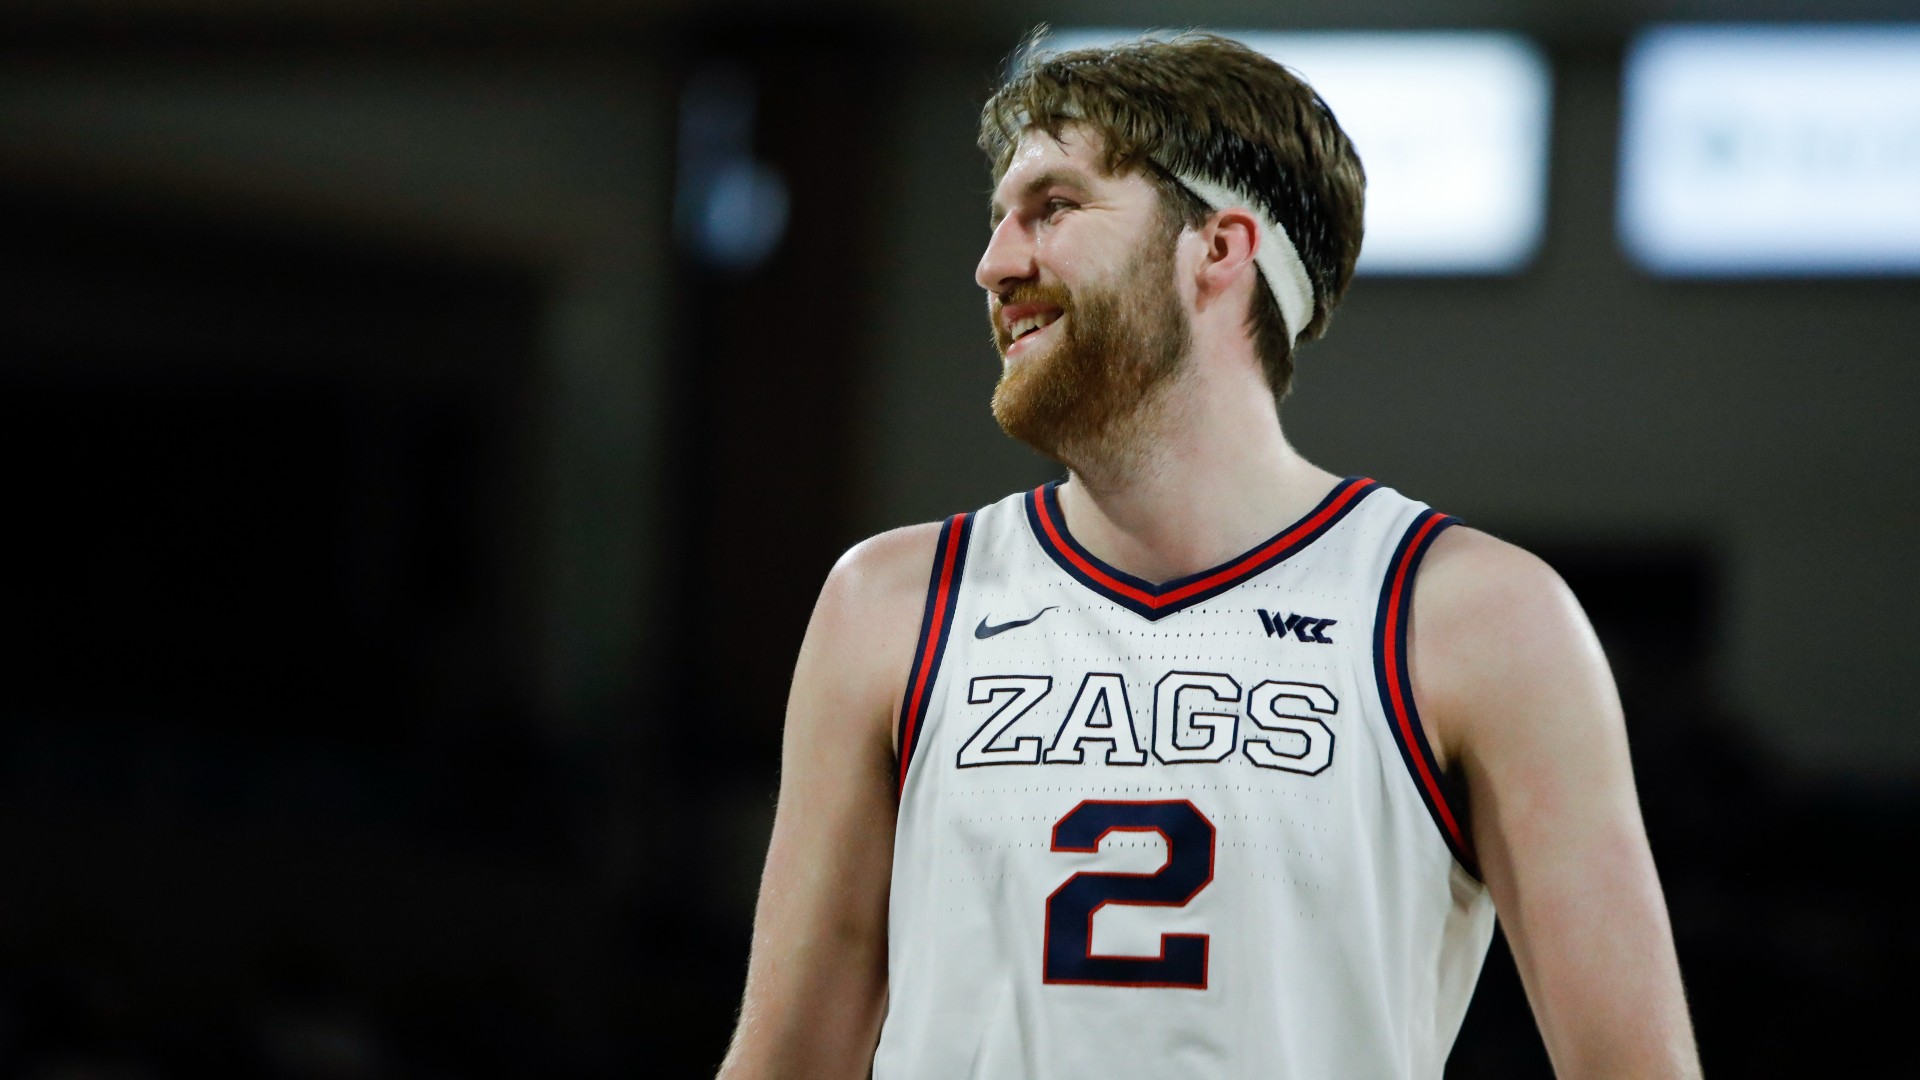 Wednesday College Basketball Odds, Picks: Predictions for 3 Games, Including Gonzaga vs. Pepperdine (Feb. 16) article feature image